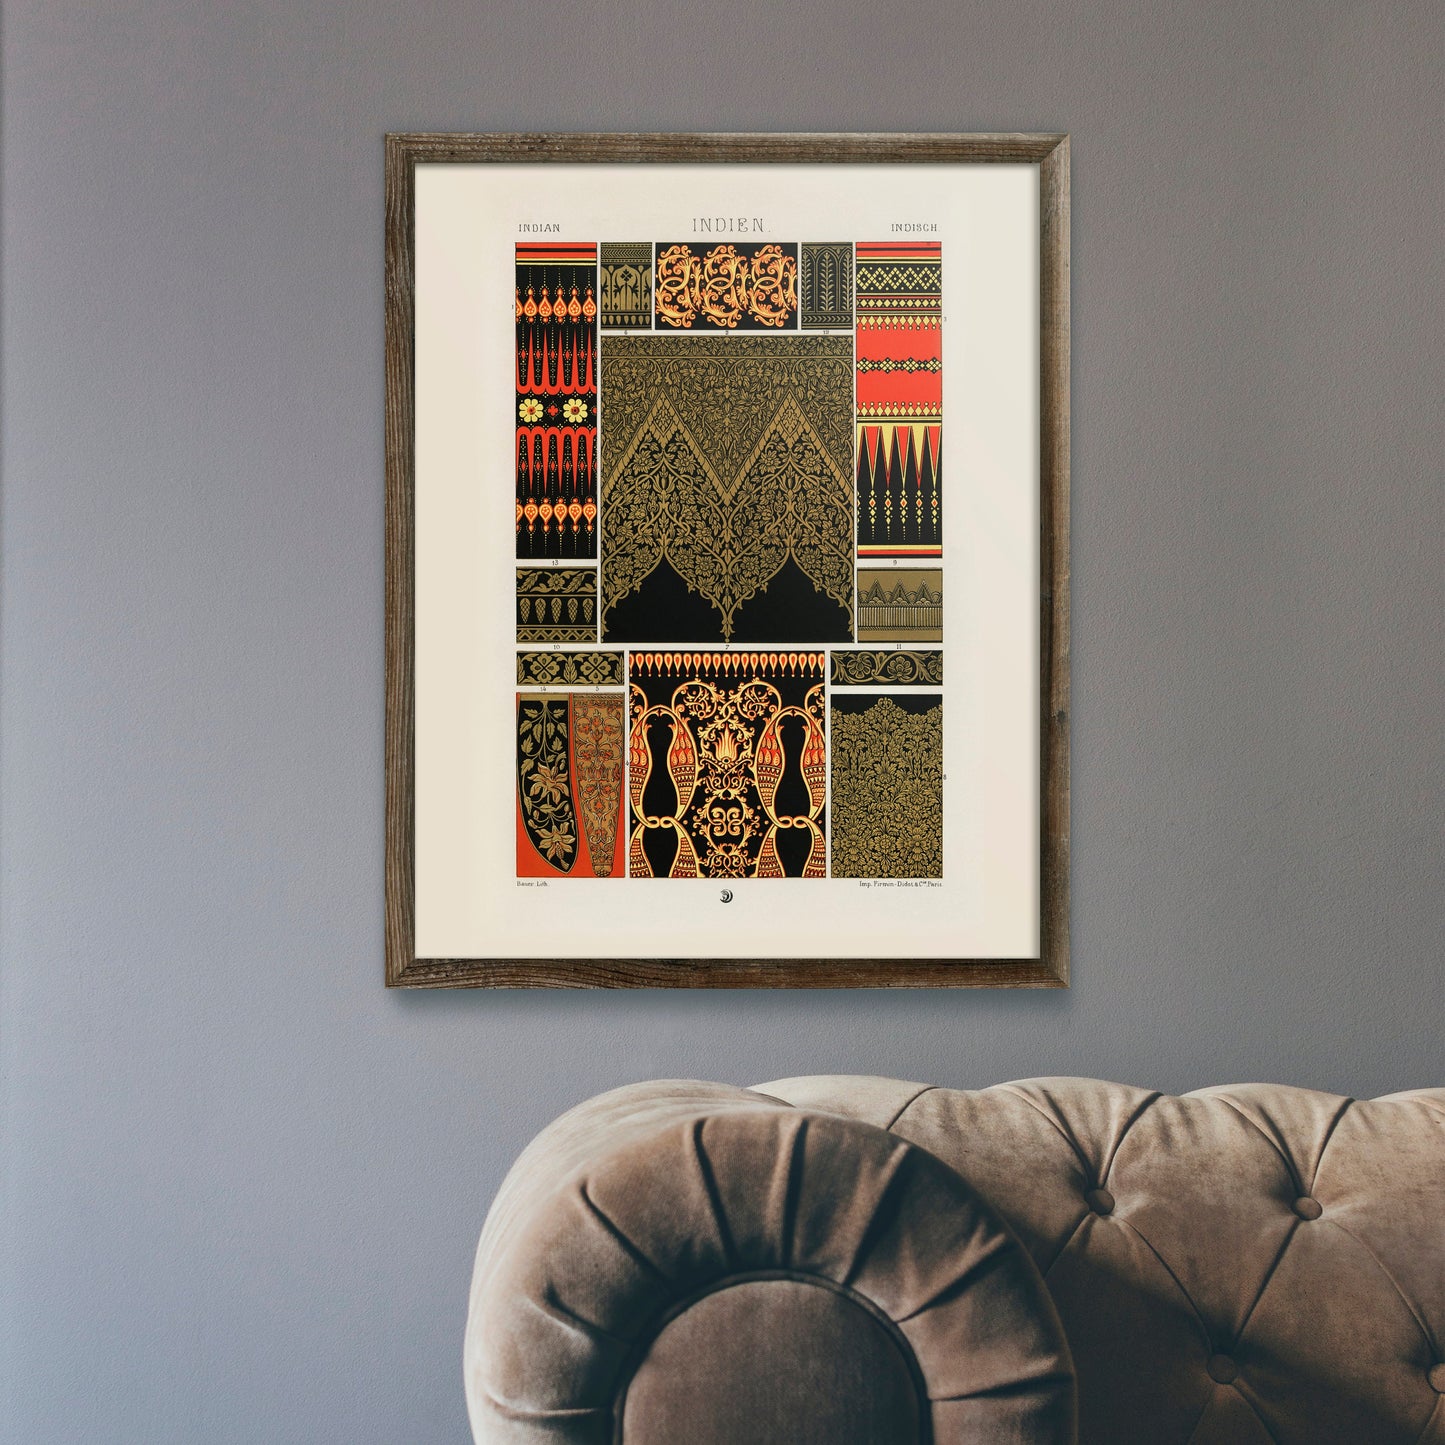 ALBERT RACINET - Indian Pattern Lithograph from 'L'ornement Polychrome'